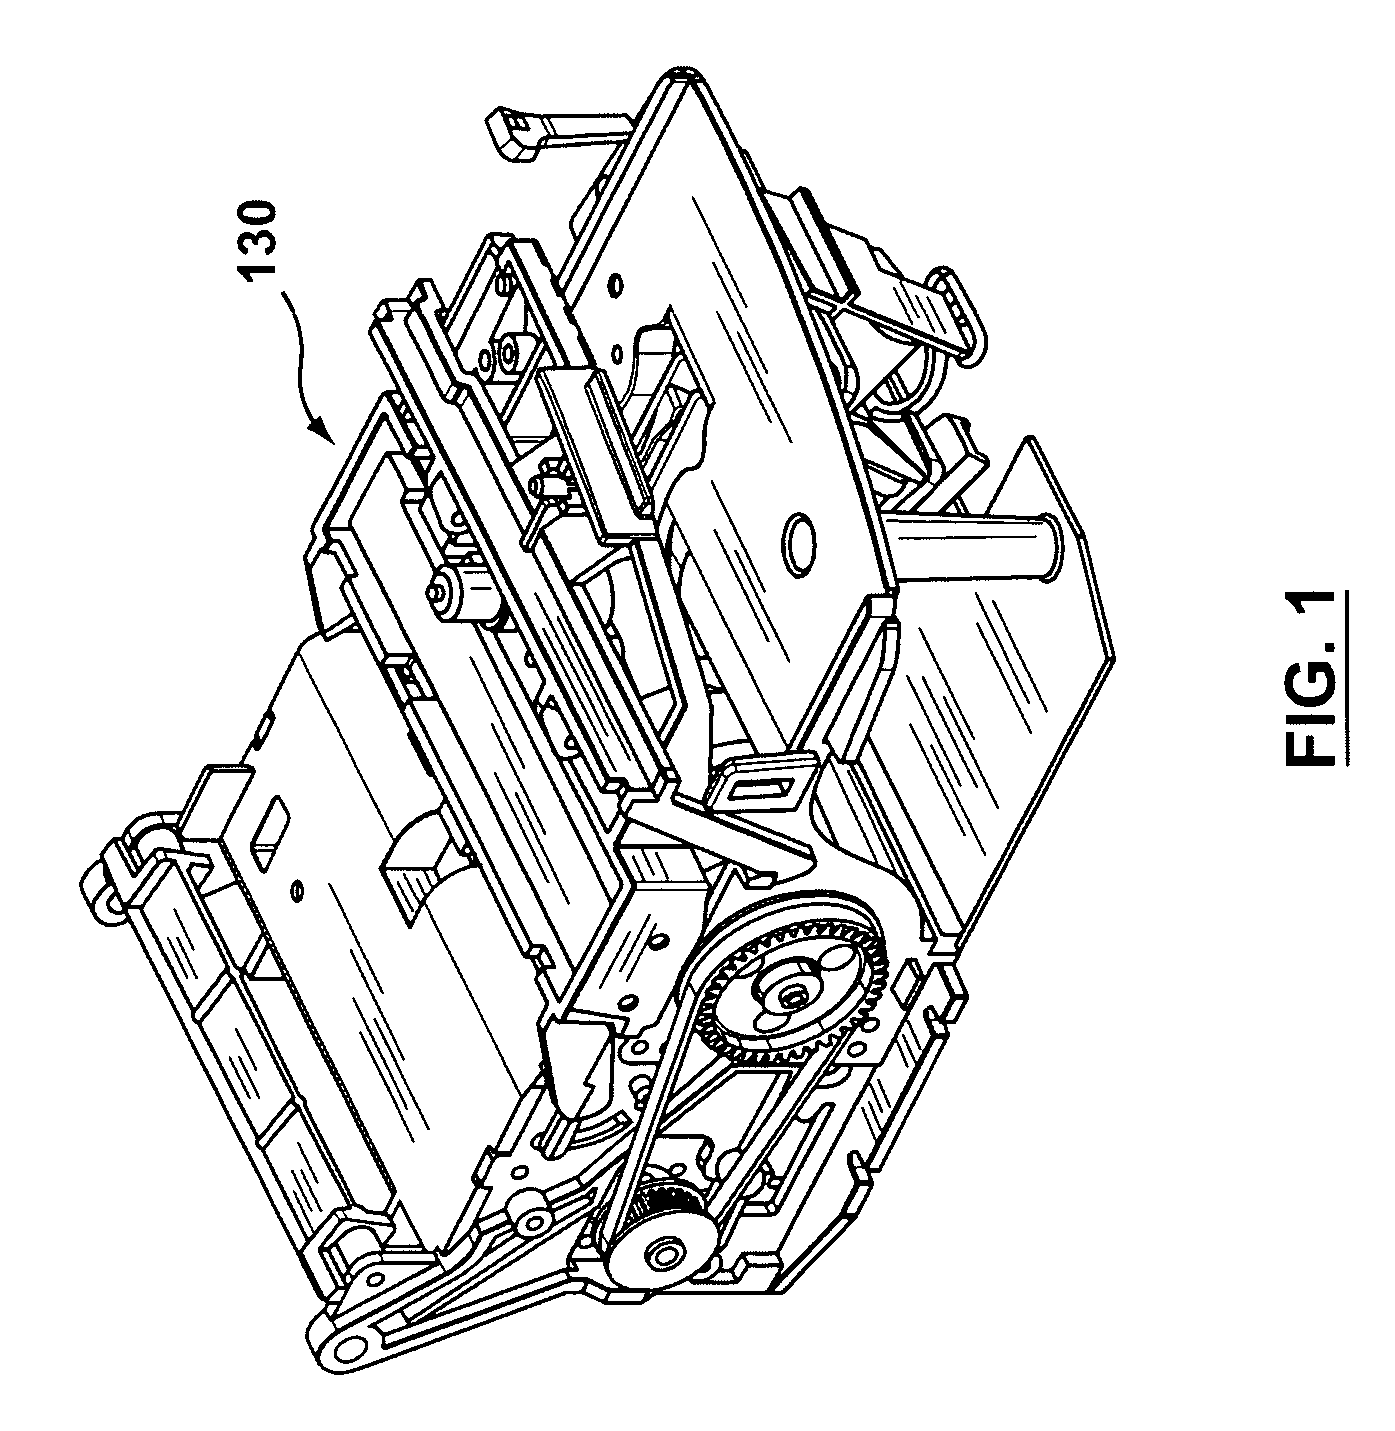 Apparatus and method for obtaining data from a document